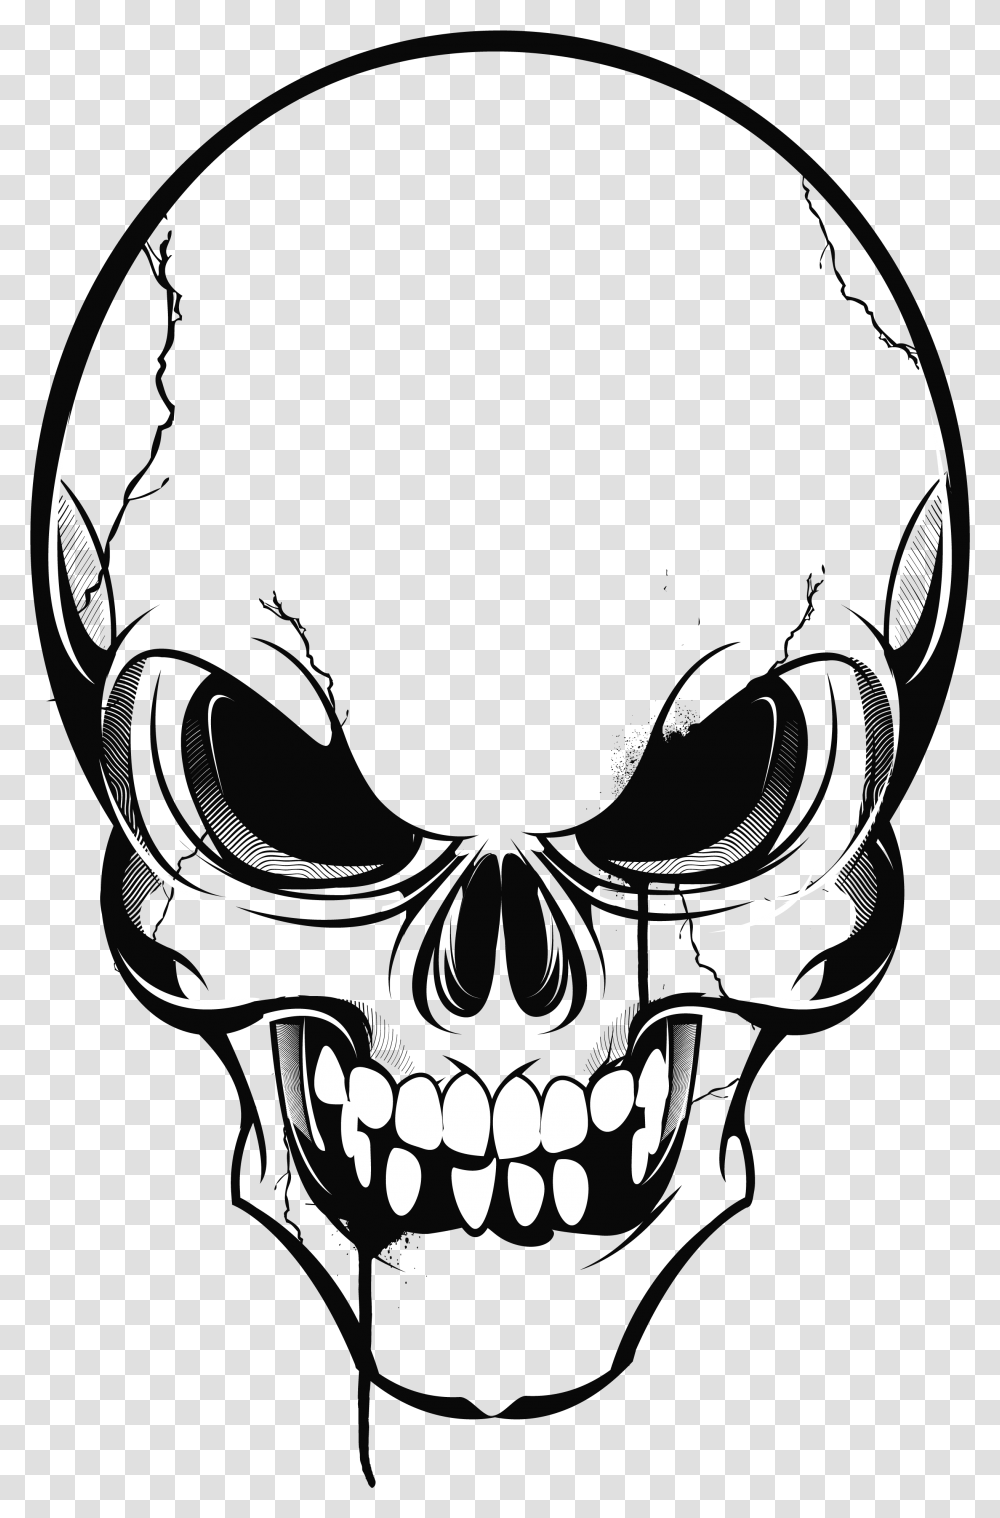 Skull Vector Black And White Skull, Sunglasses, Accessories, Accessory Transparent Png